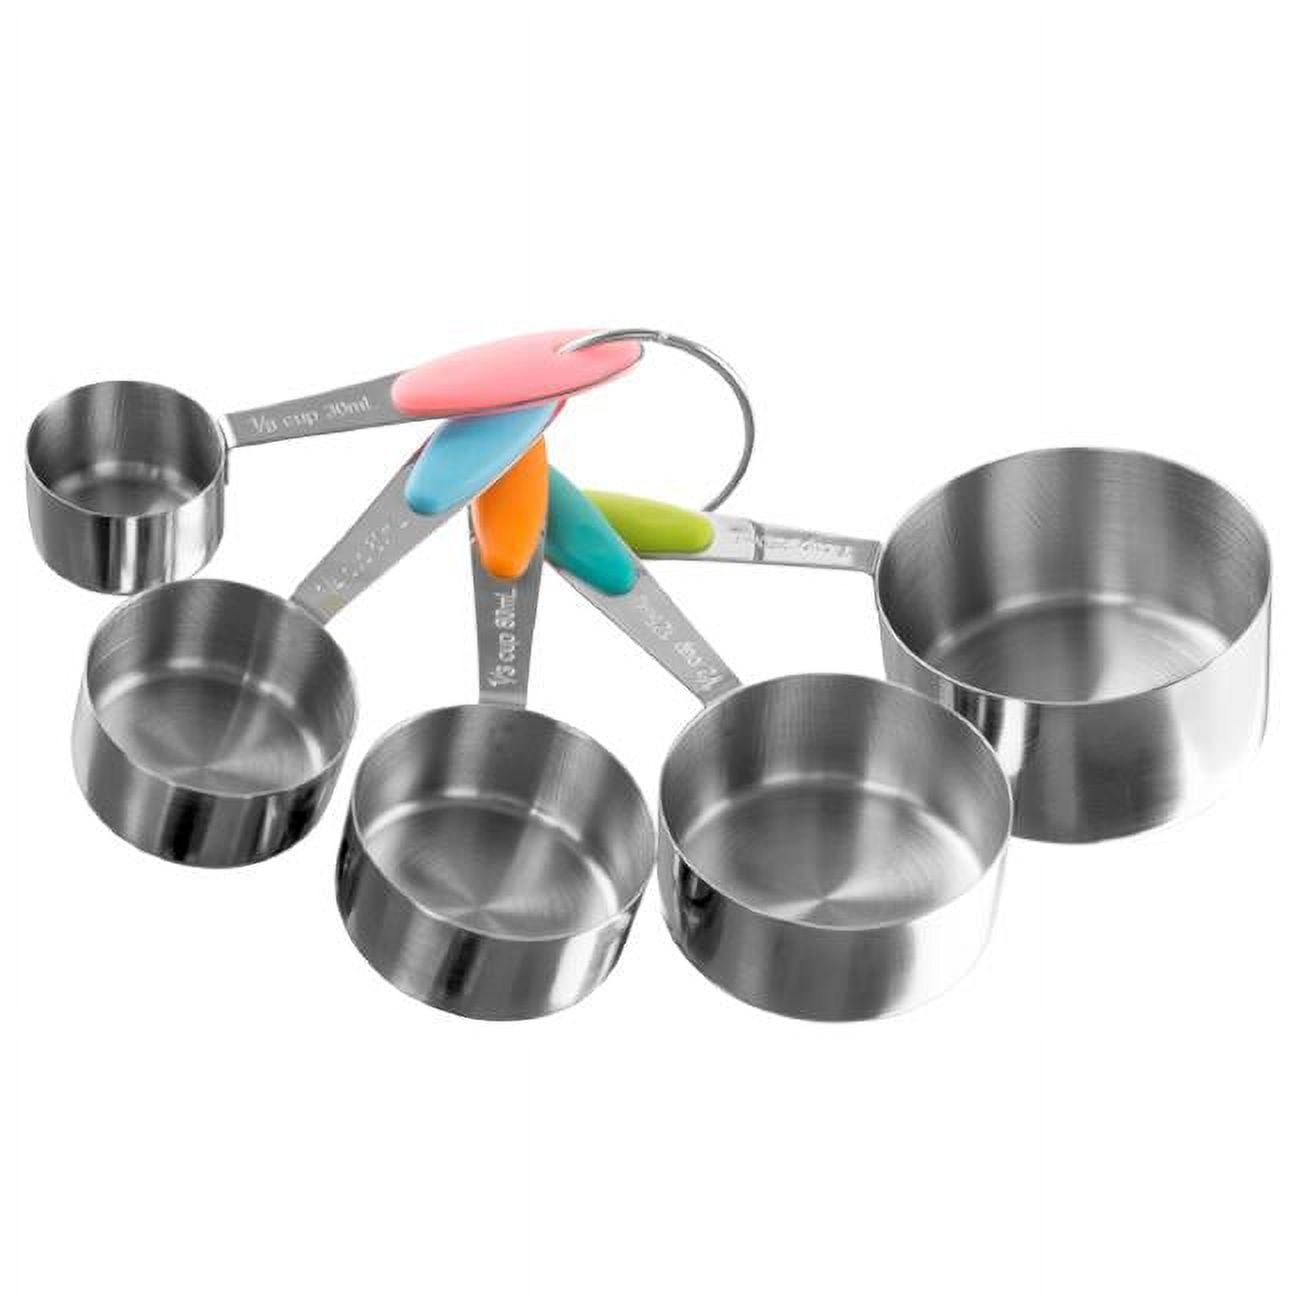 Classic Cuisine 82-KIT1037 Measuring Cups Set, Stainless Steel